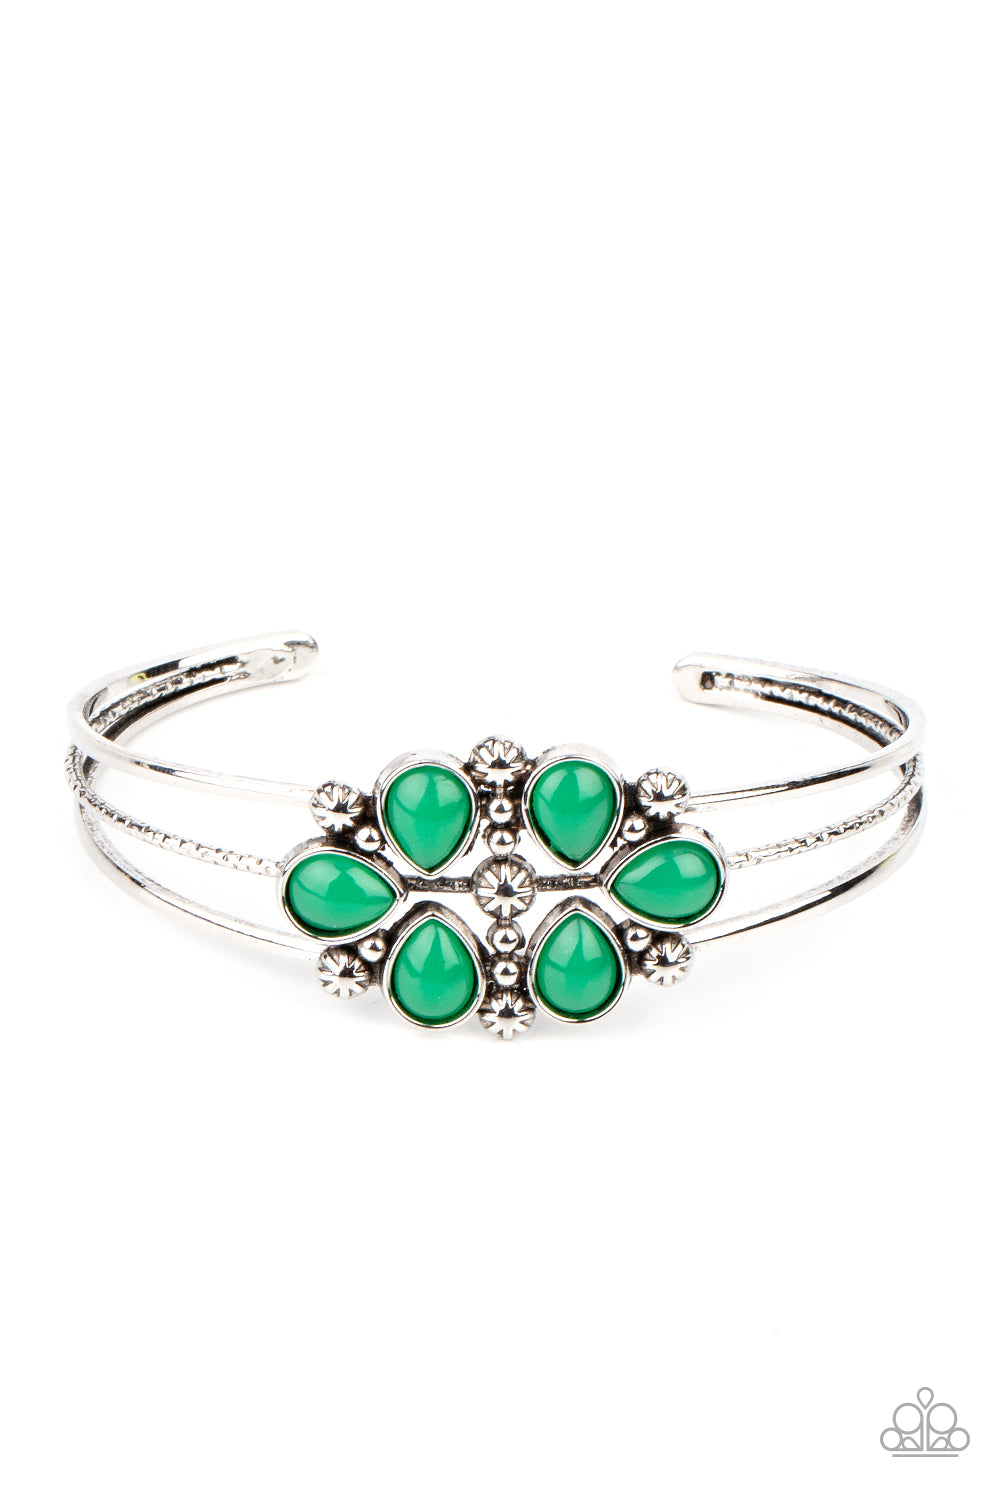 A whimsical collection of glassy Leprechaun teardrop beads, dainty silver studs, and silver floral accents coalesce into a colorful centerpiece atop a layered silver cuff.